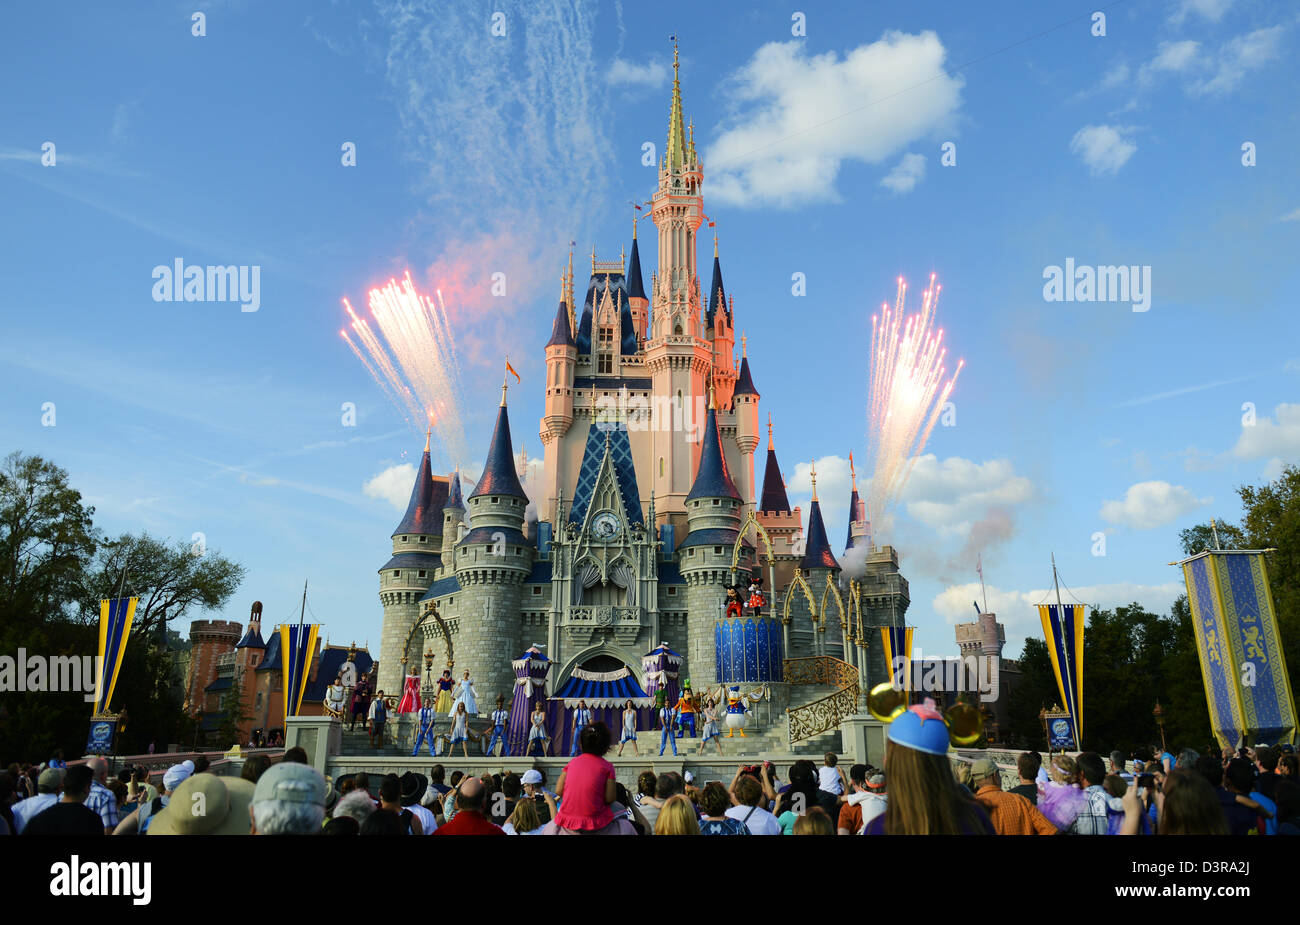 Fireworks going off at the Disney castle in Disney World after a show with Mickey and Minnie, Goofy, and other characters. Stock Photo